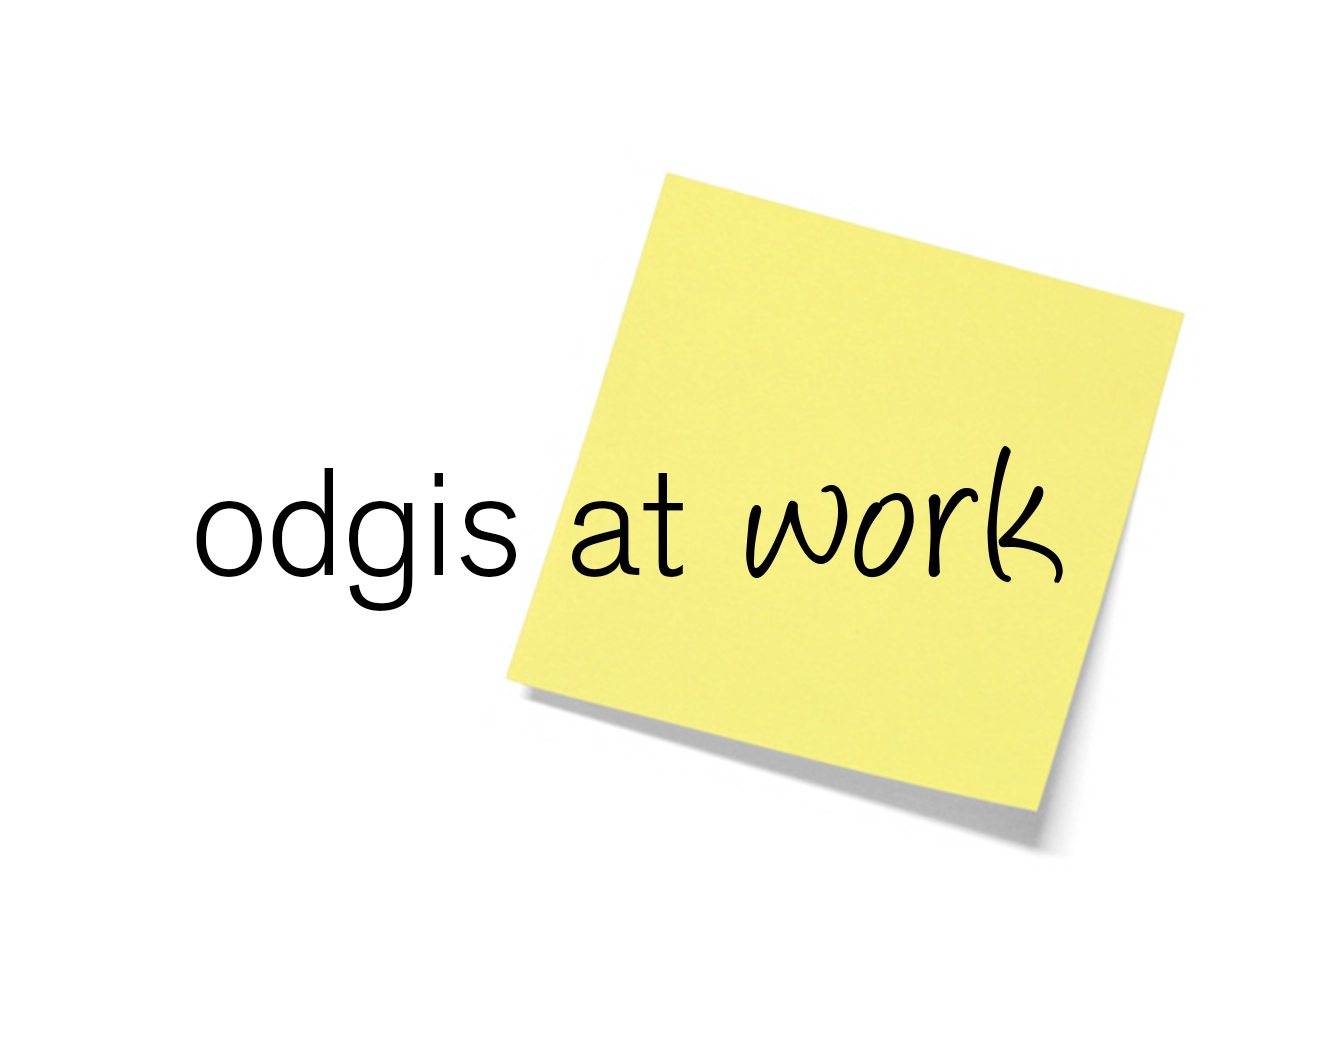 odgis at work written on a post-it